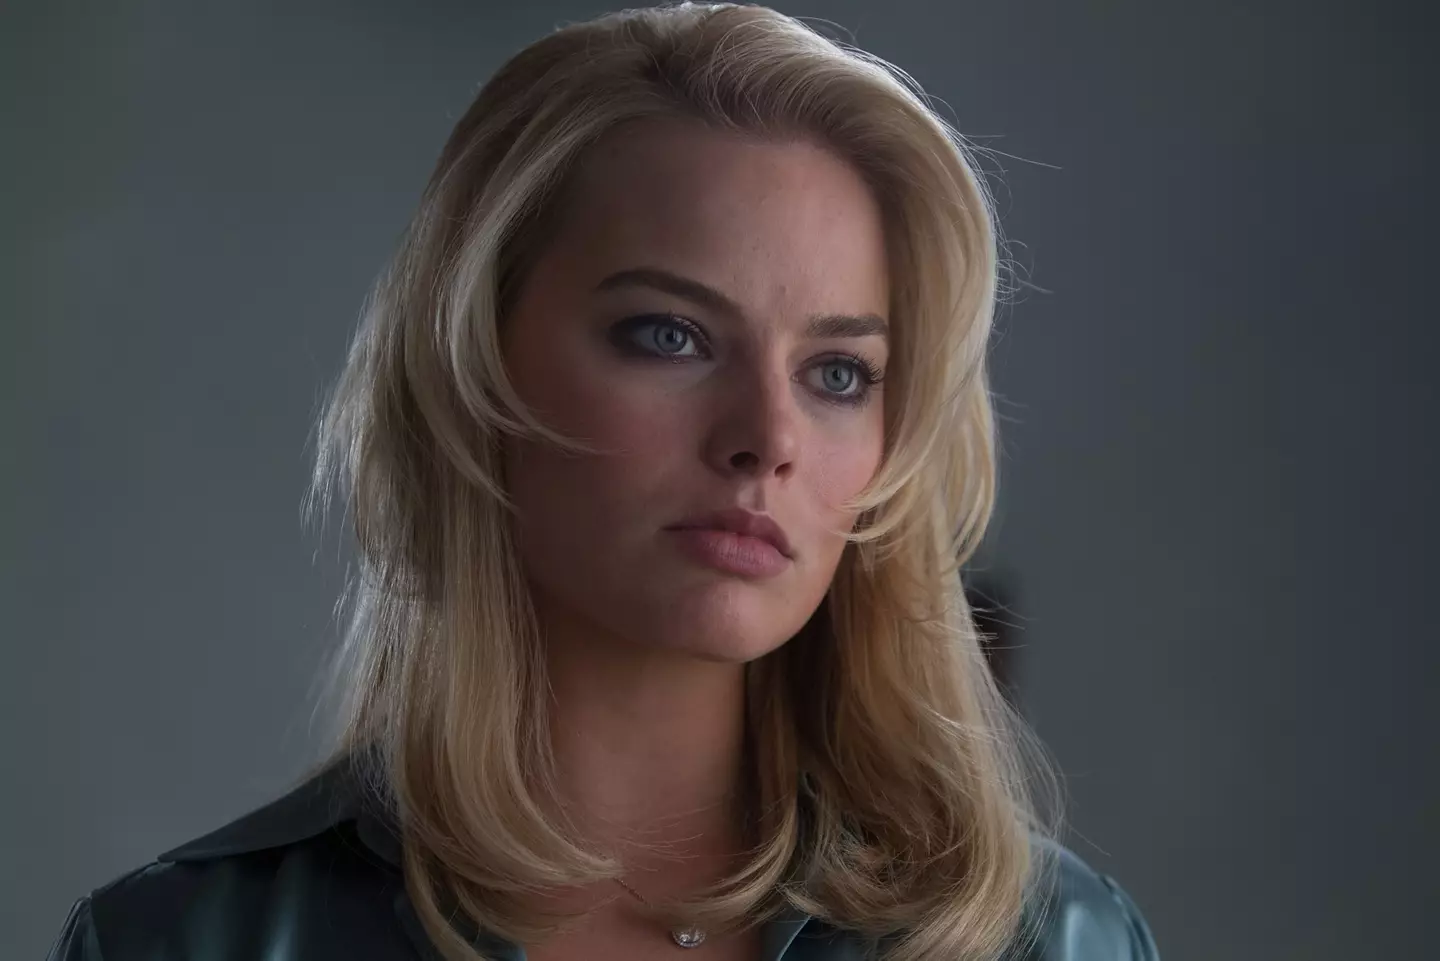 Margot Robbie has an unhealthy obsession with Harry Potter.